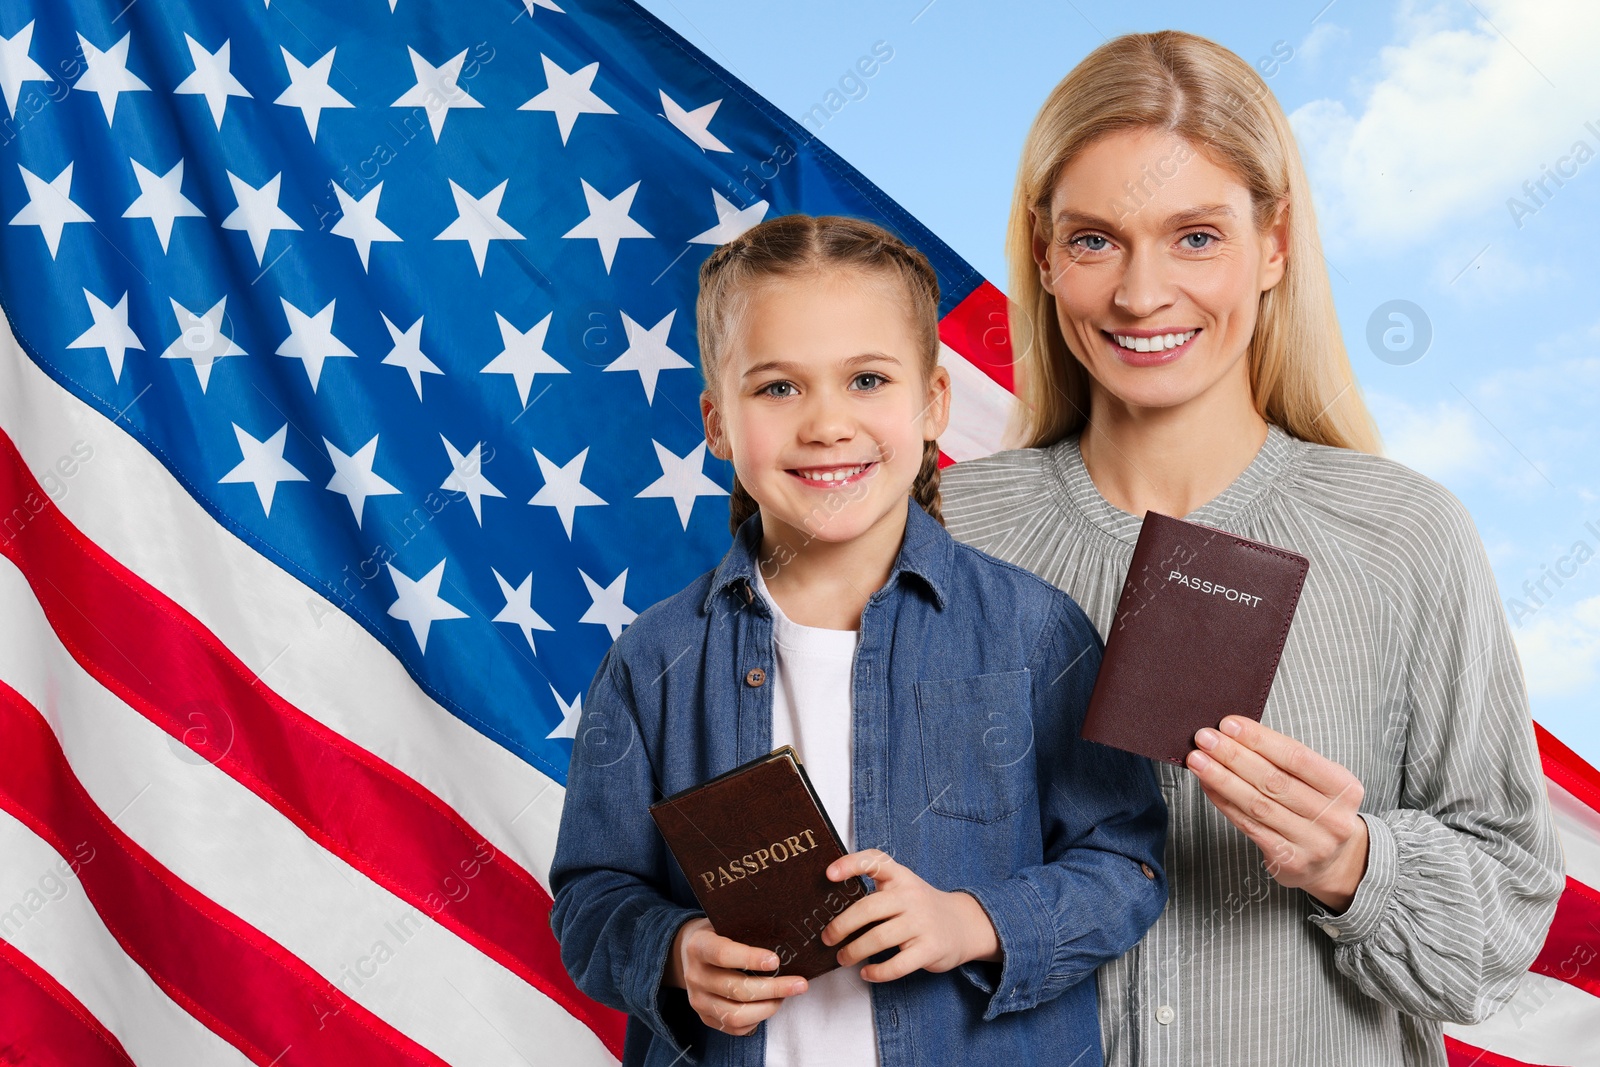 Image of Immigration. Happy woman and her daughter with passports and national flag of United States against blue sky, space for text